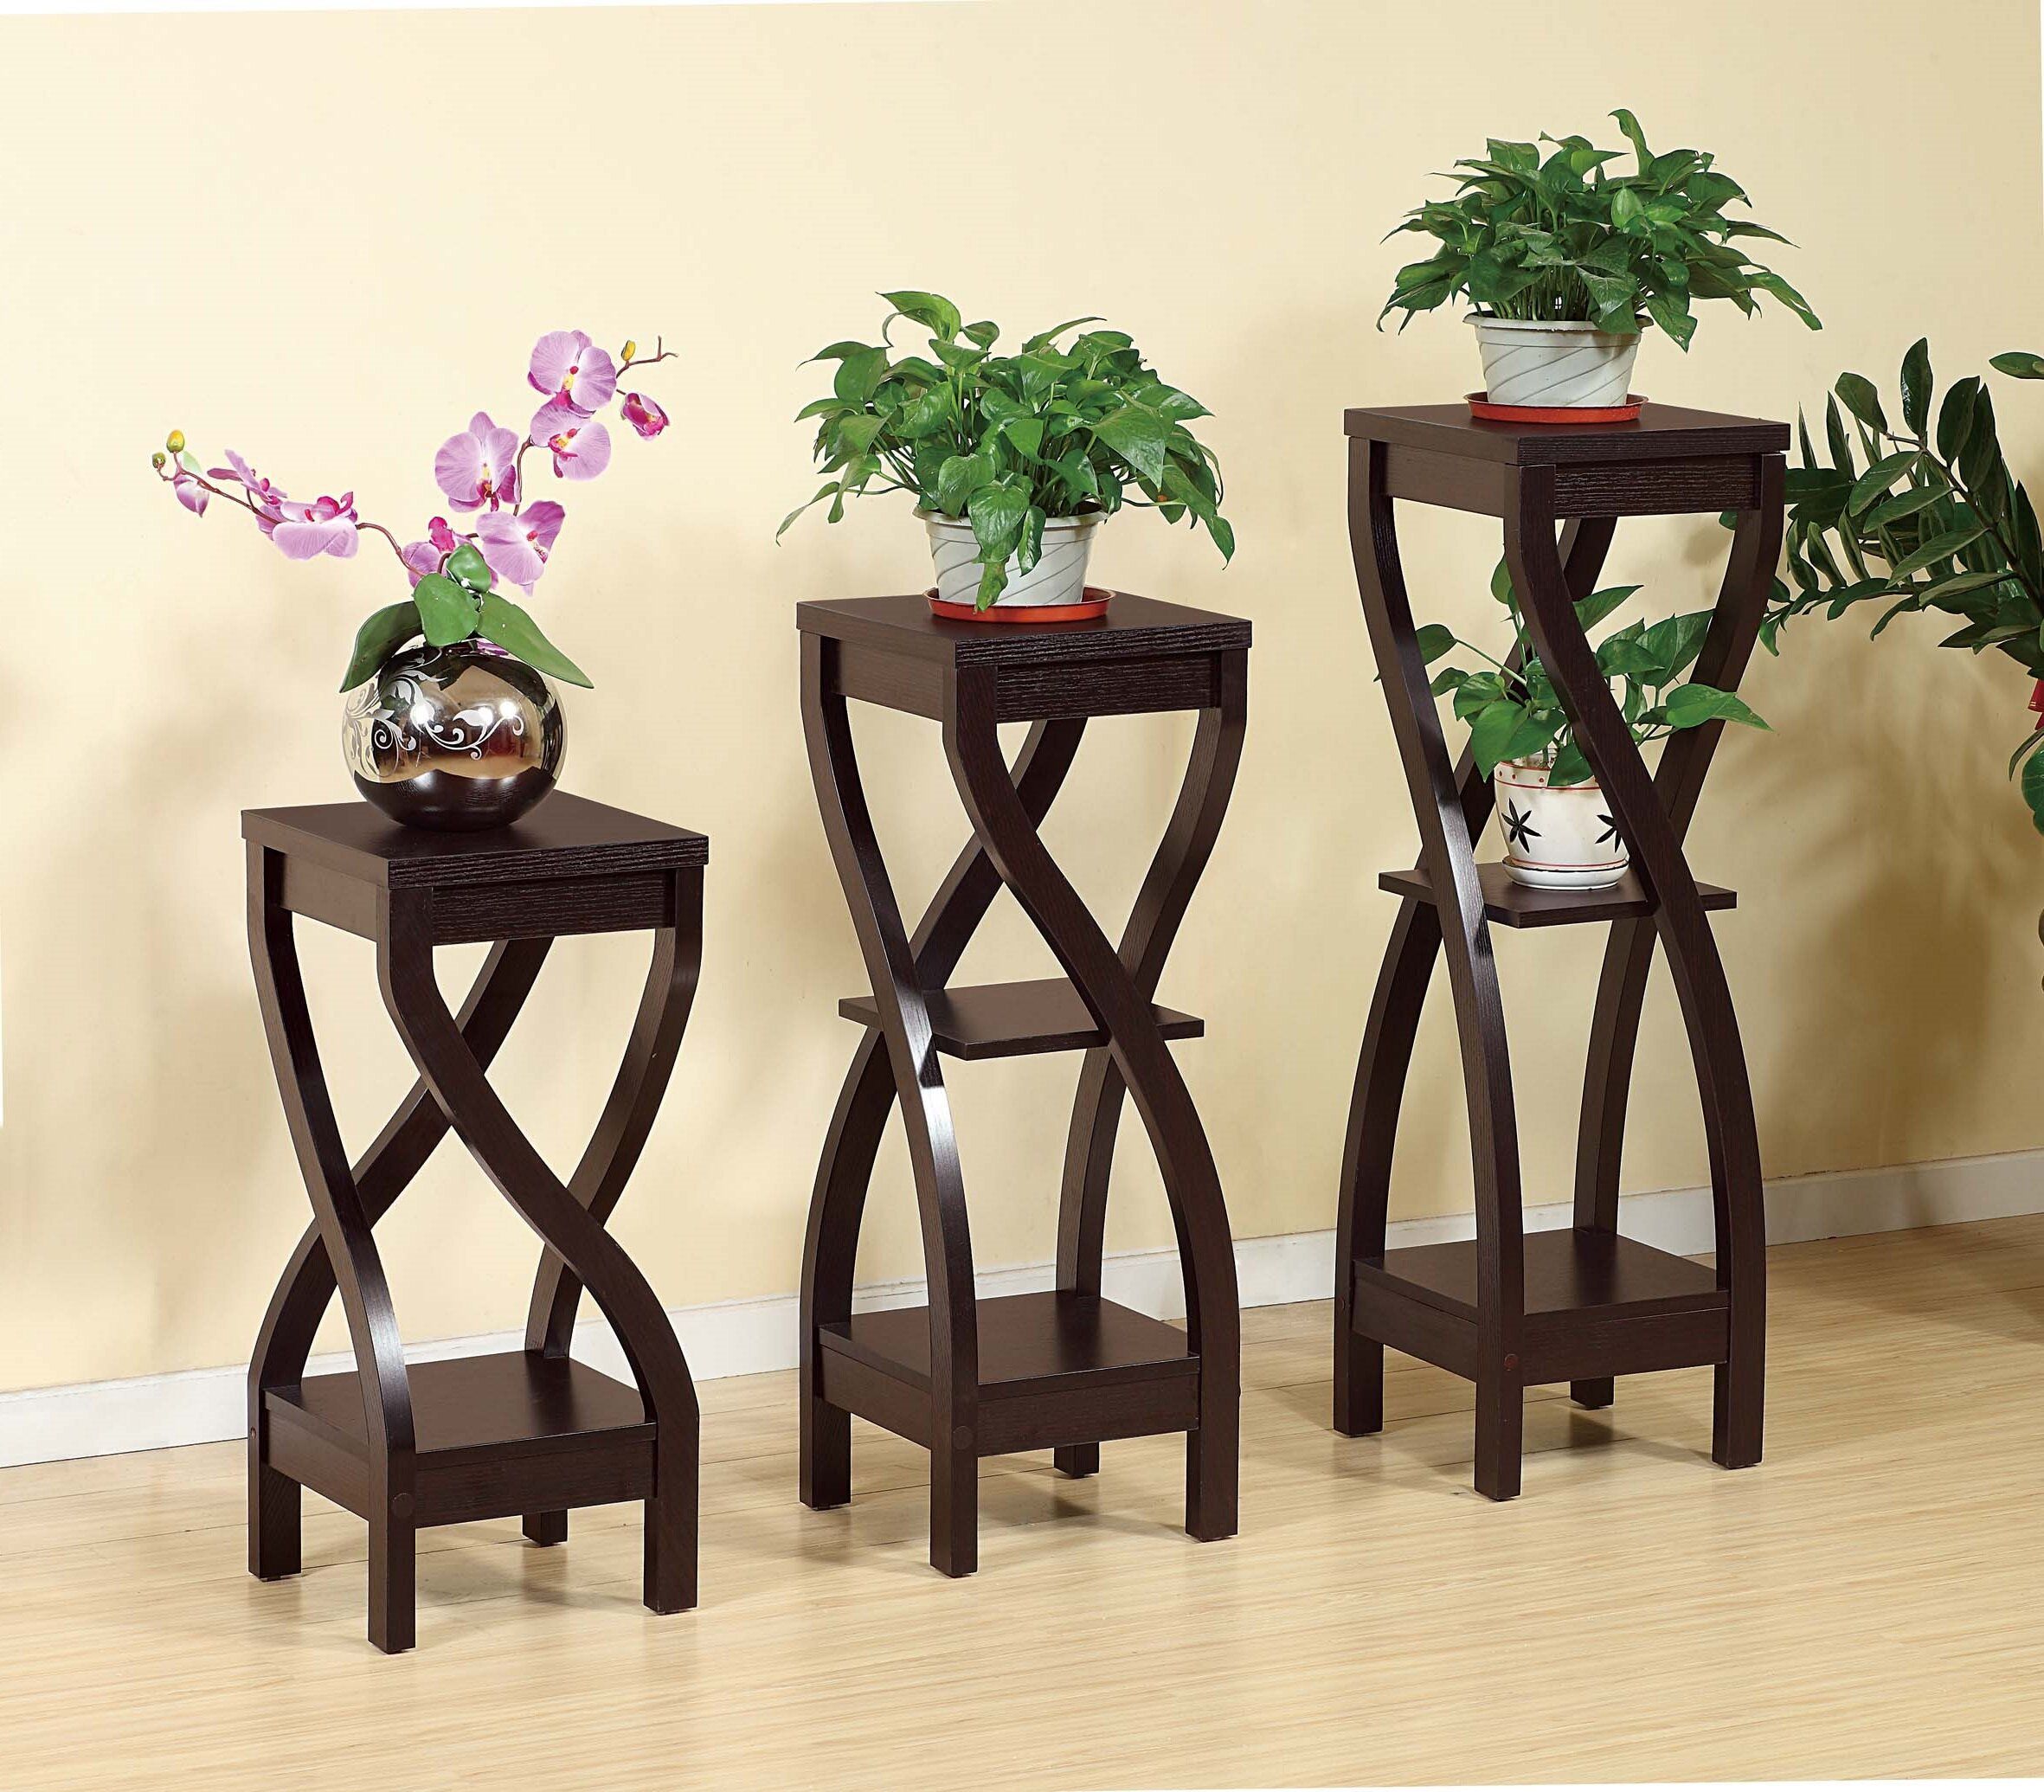 Ebern Designs Delhi Square Pedestal Plant Stand & Reviews | Wayfair Intended For Pedestal Plant Stands (View 6 of 15)